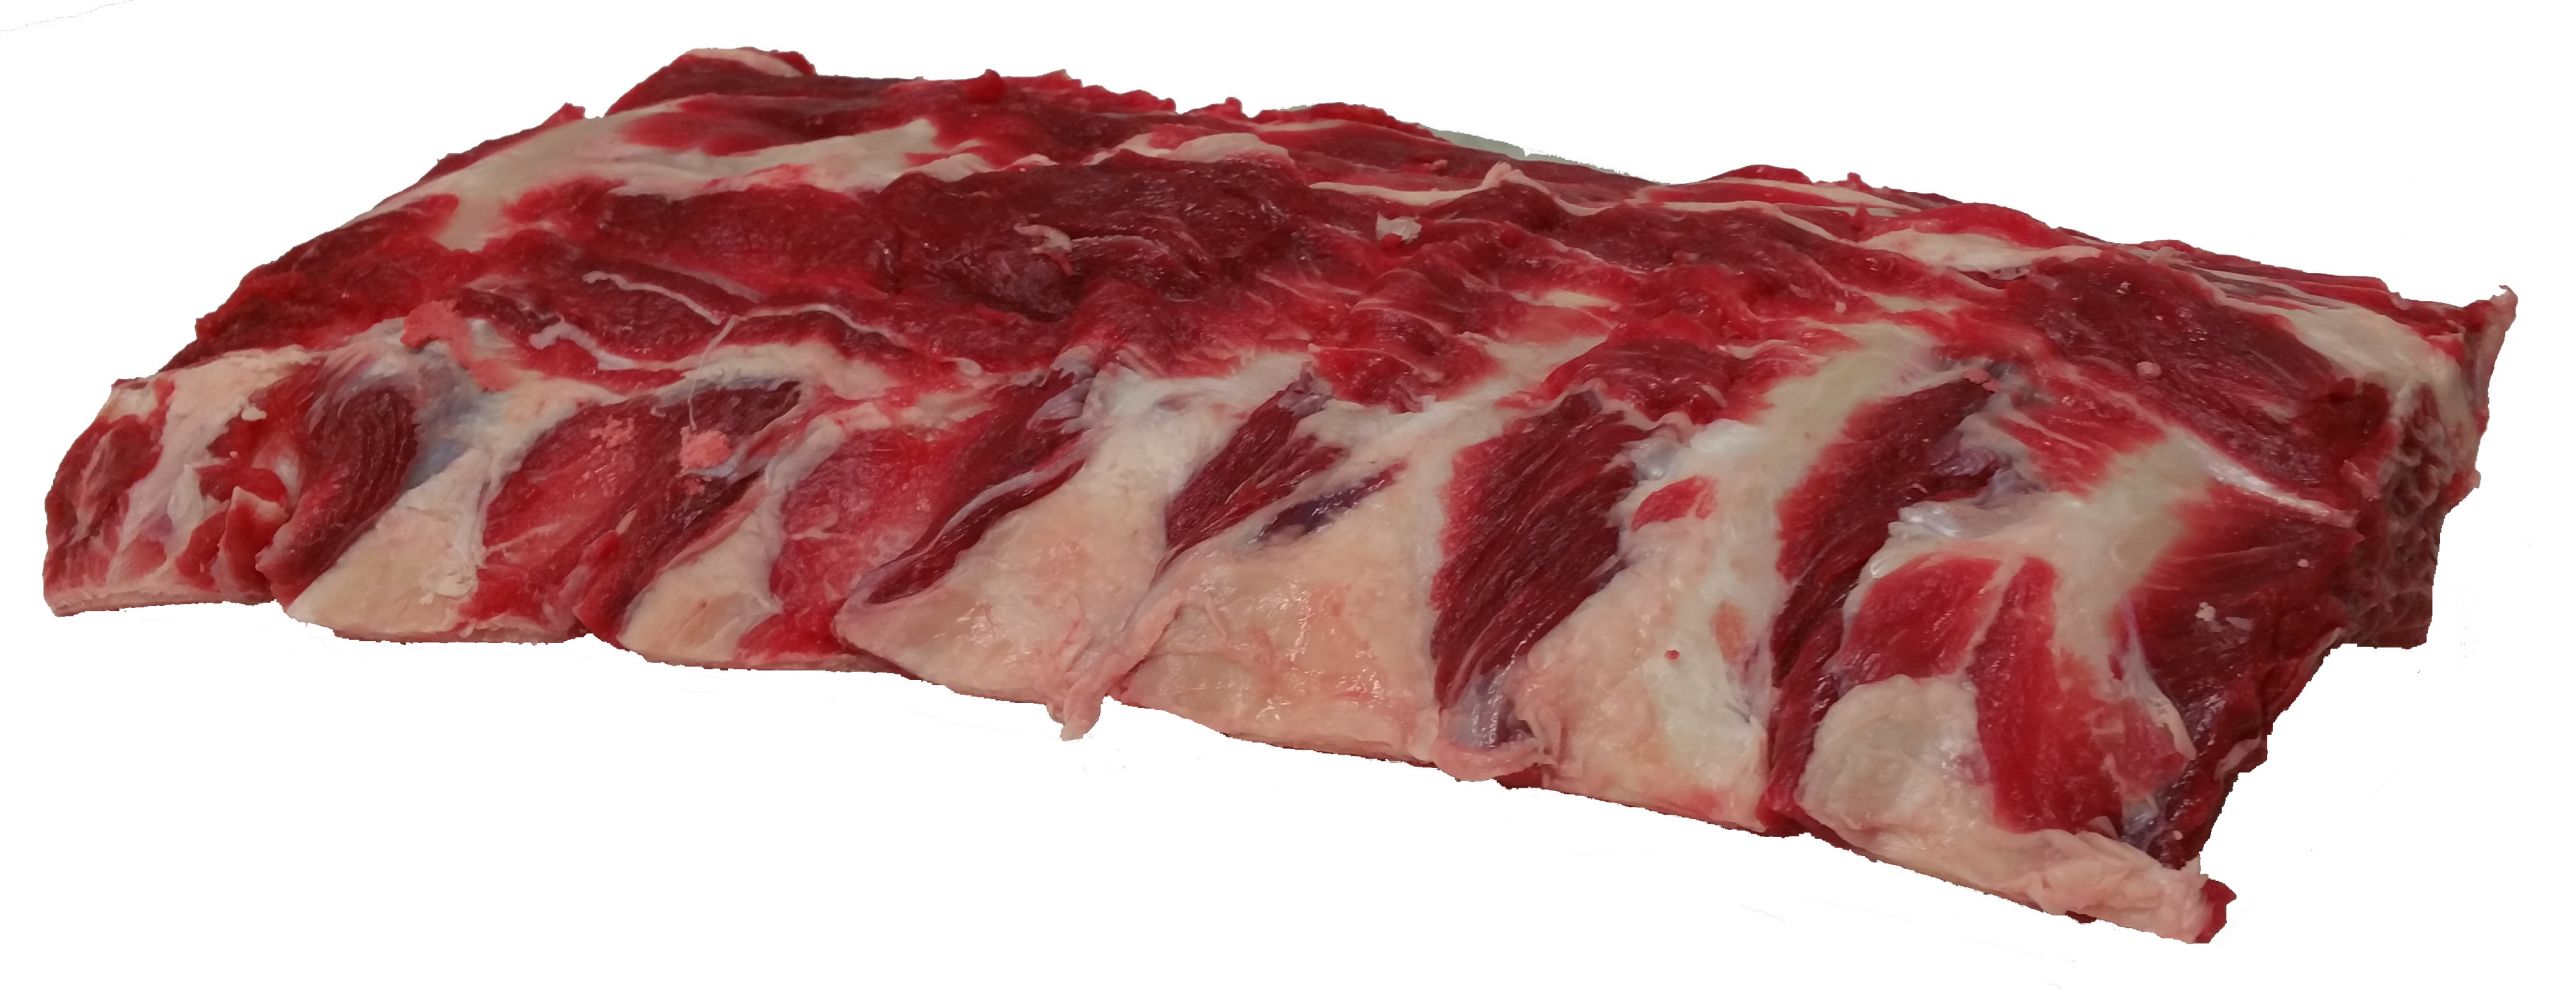 Are Baby Back Ribs Beef Or Pork
 Beef Baby Back Ribs